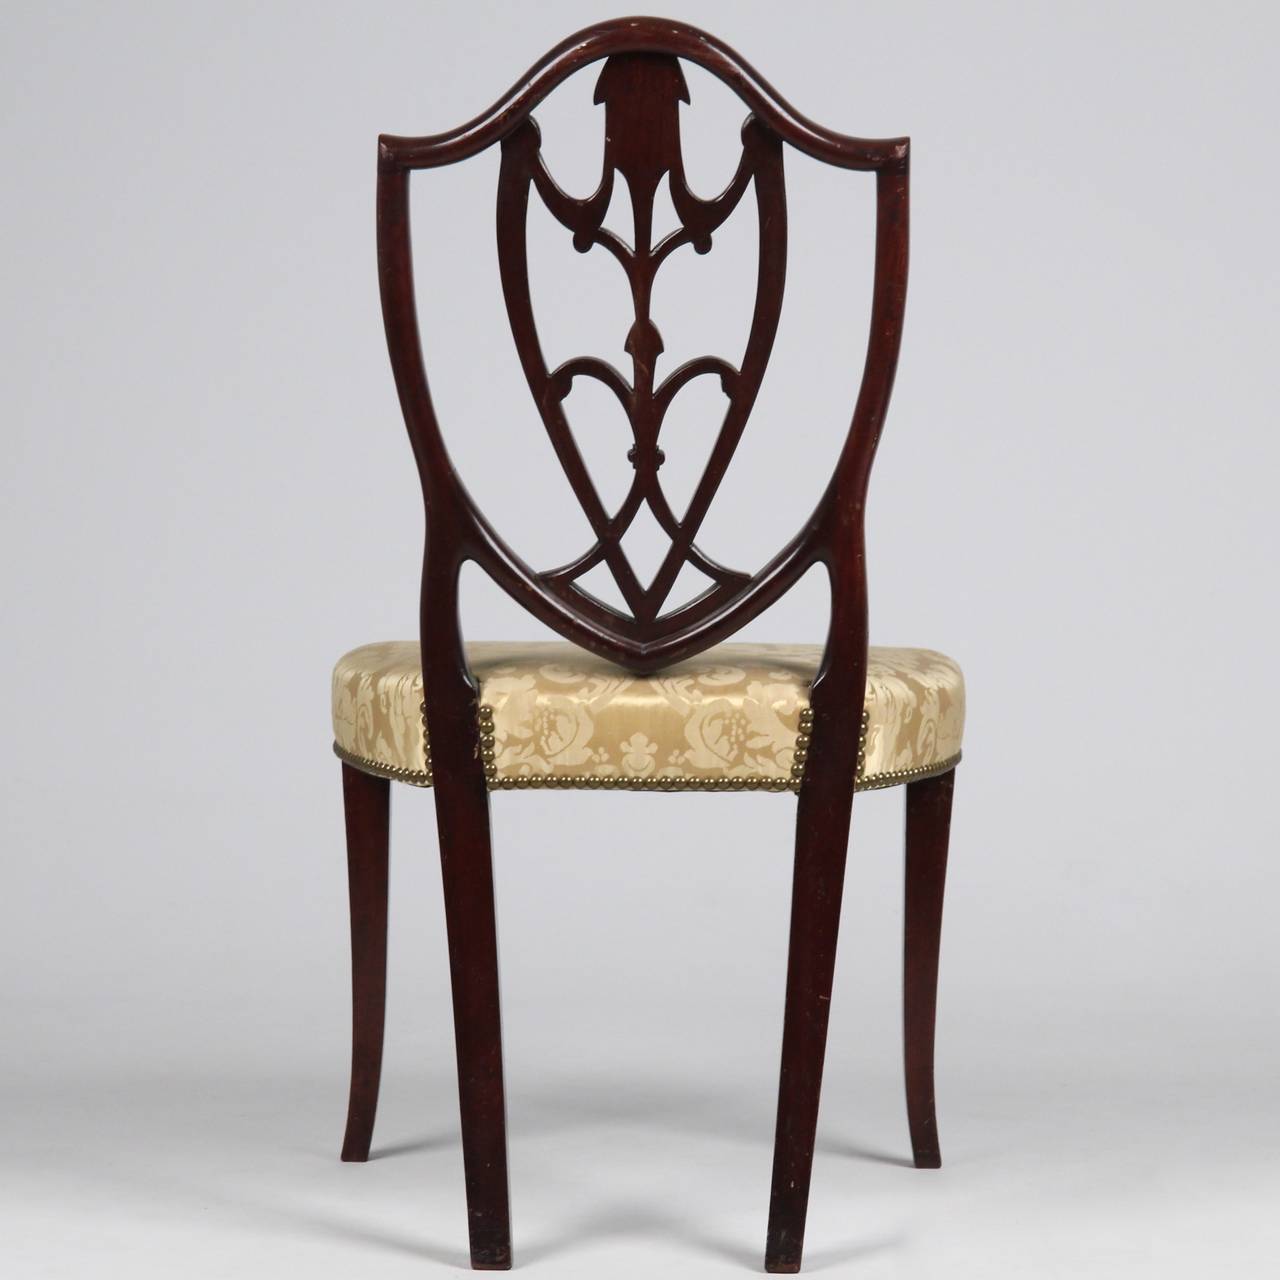 Late 18th Century American Federal Carved Mahogany Side Chair, New York, circa 1790